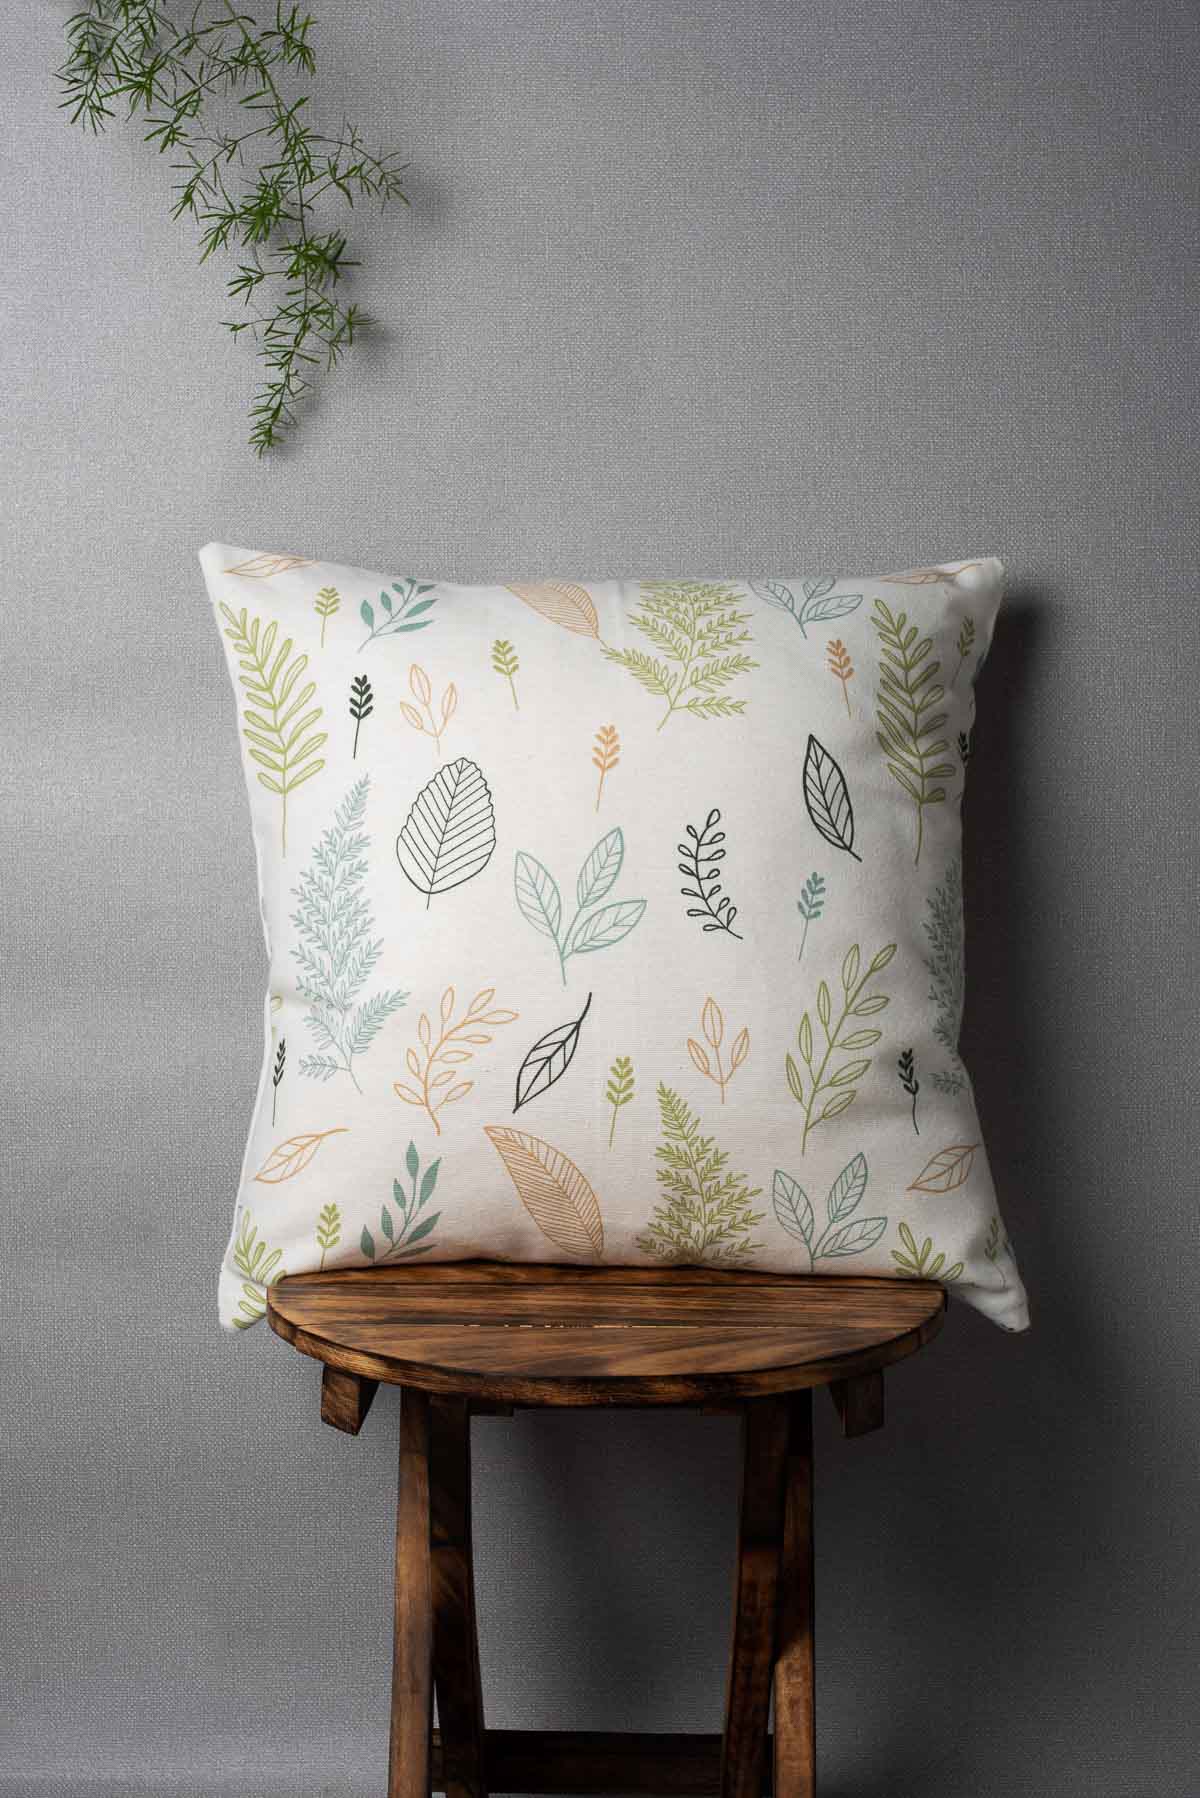 Rustling Leaves Printed Cotton Cushion Cover - Green